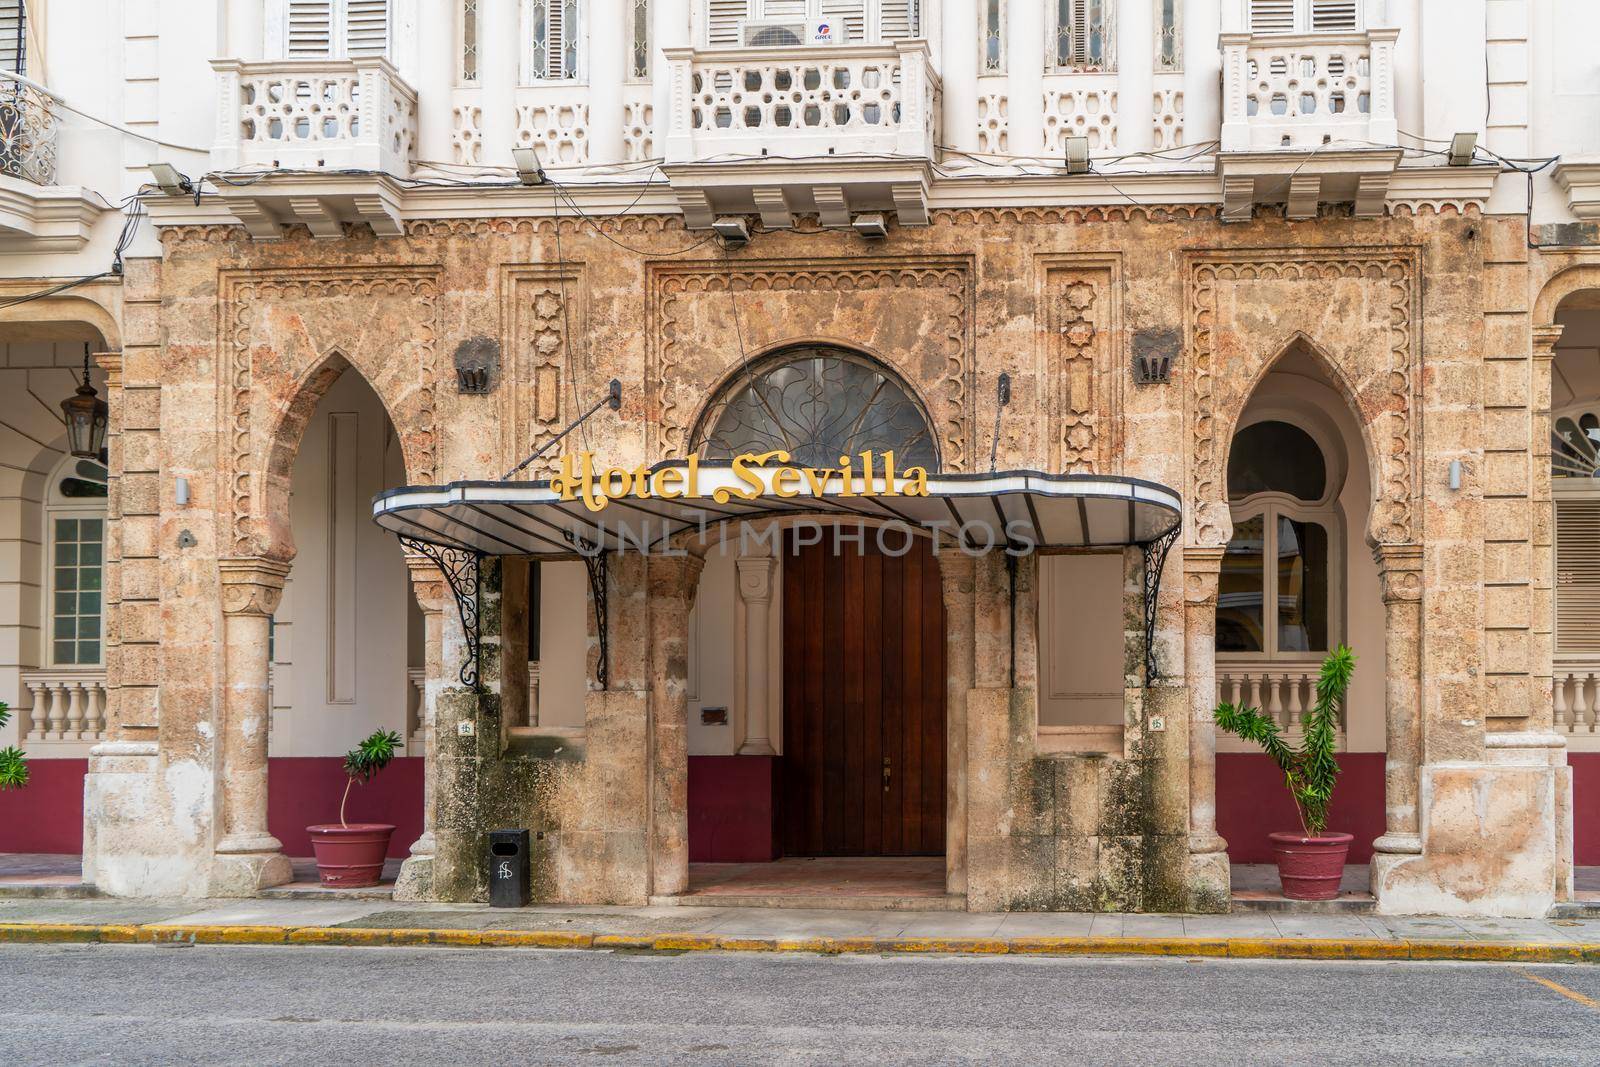 Havana Cuba. November 25, 2020: Exterior view of the facade of the Hotel Sevilla, a place visited by tourists